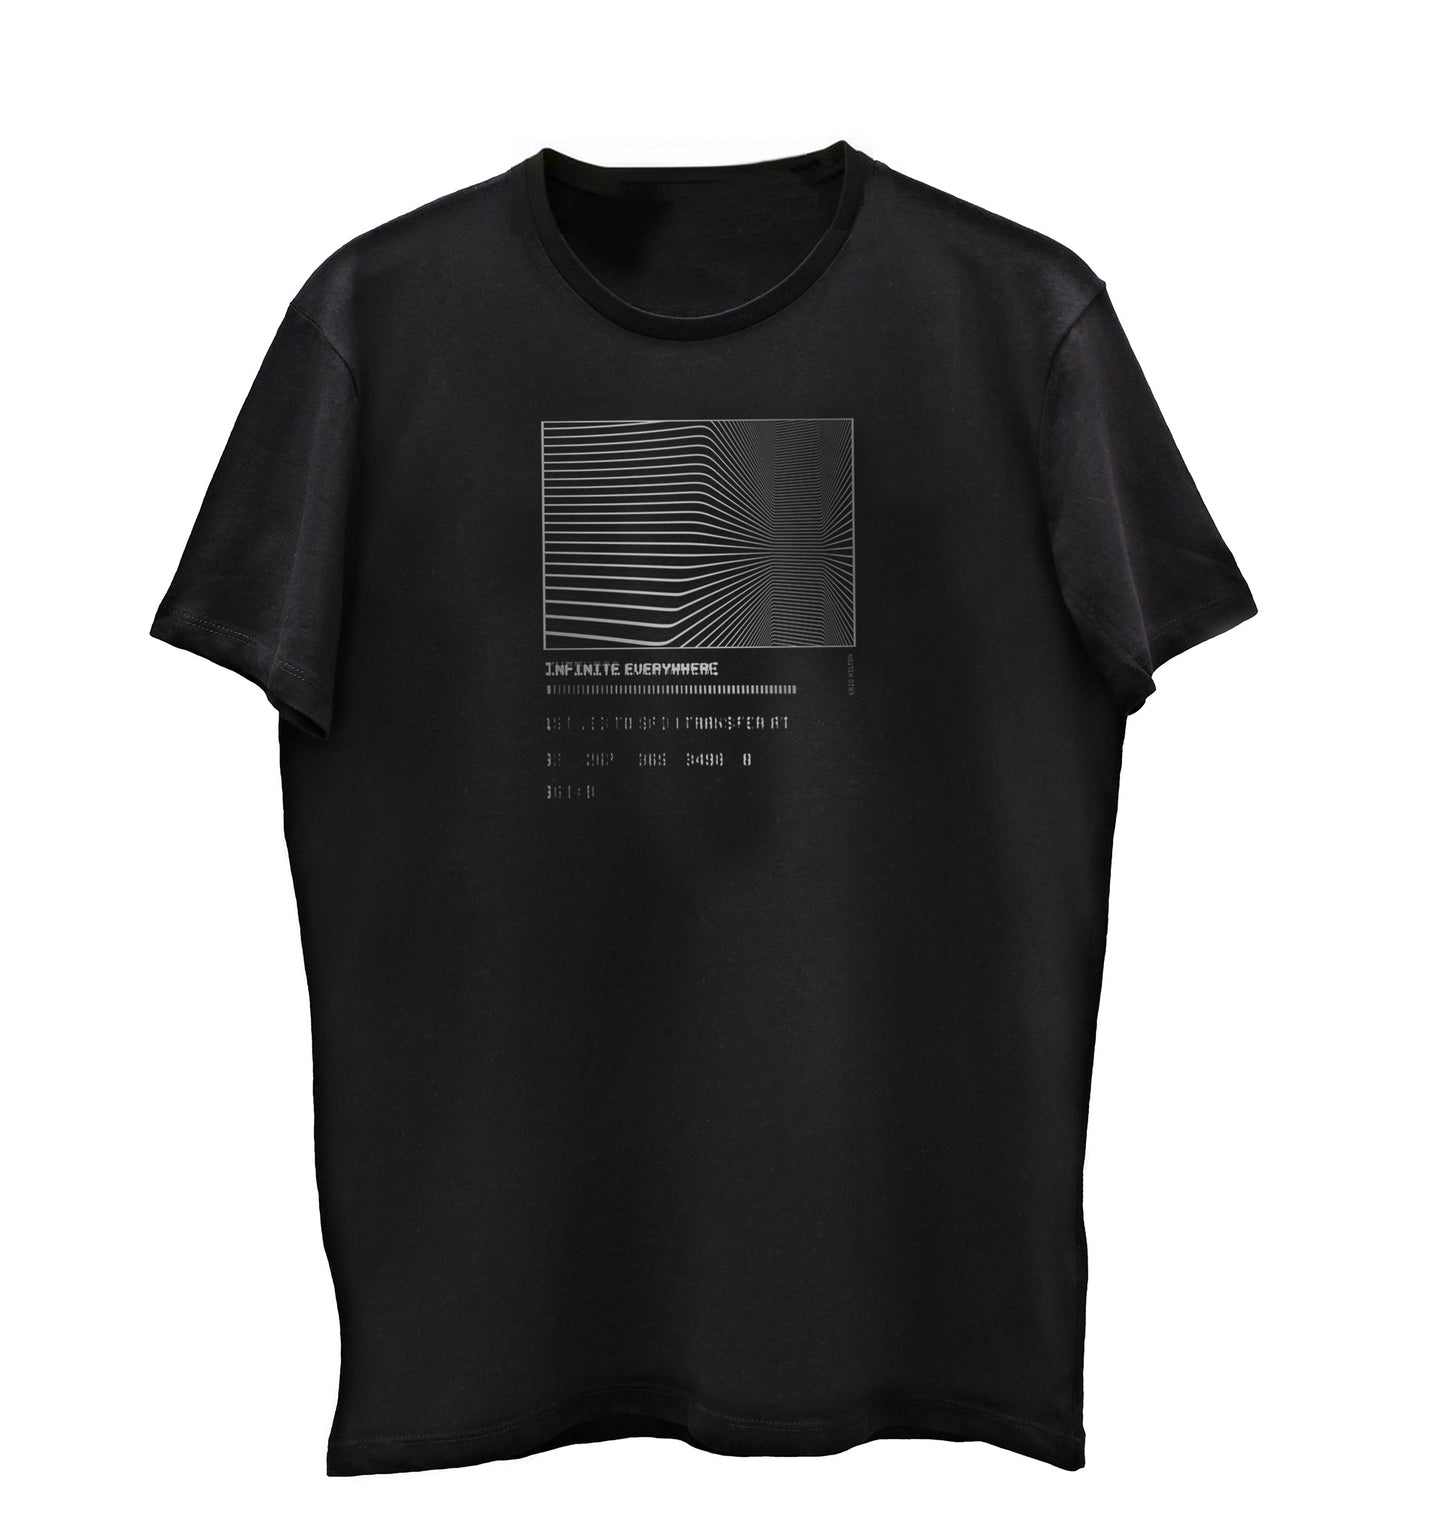 Infinite Everywhere Limited Edition T-Shirt